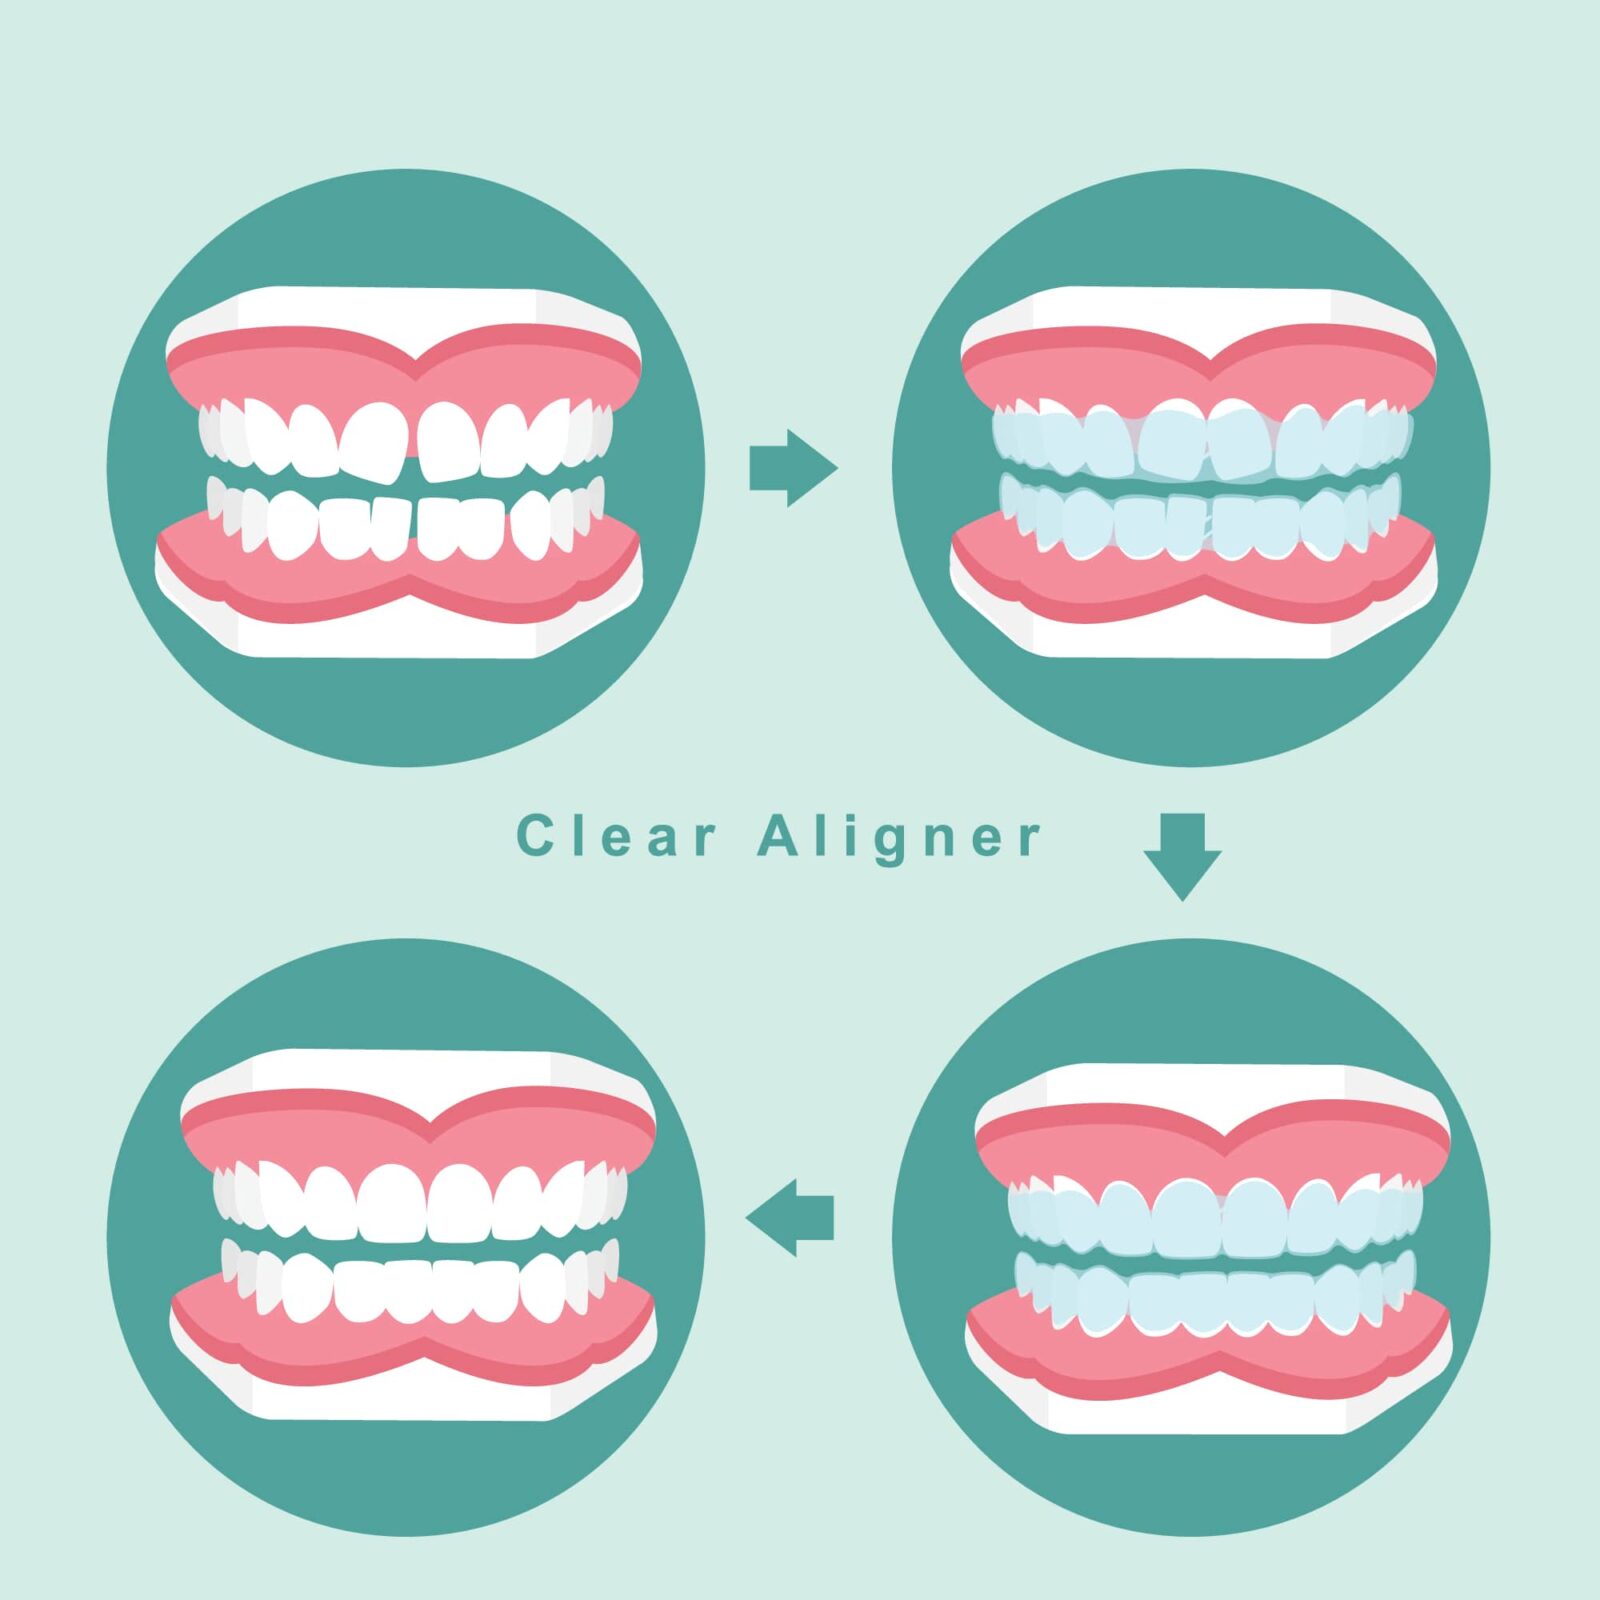 image showing the progression of orthodontic treatment with clear aligners